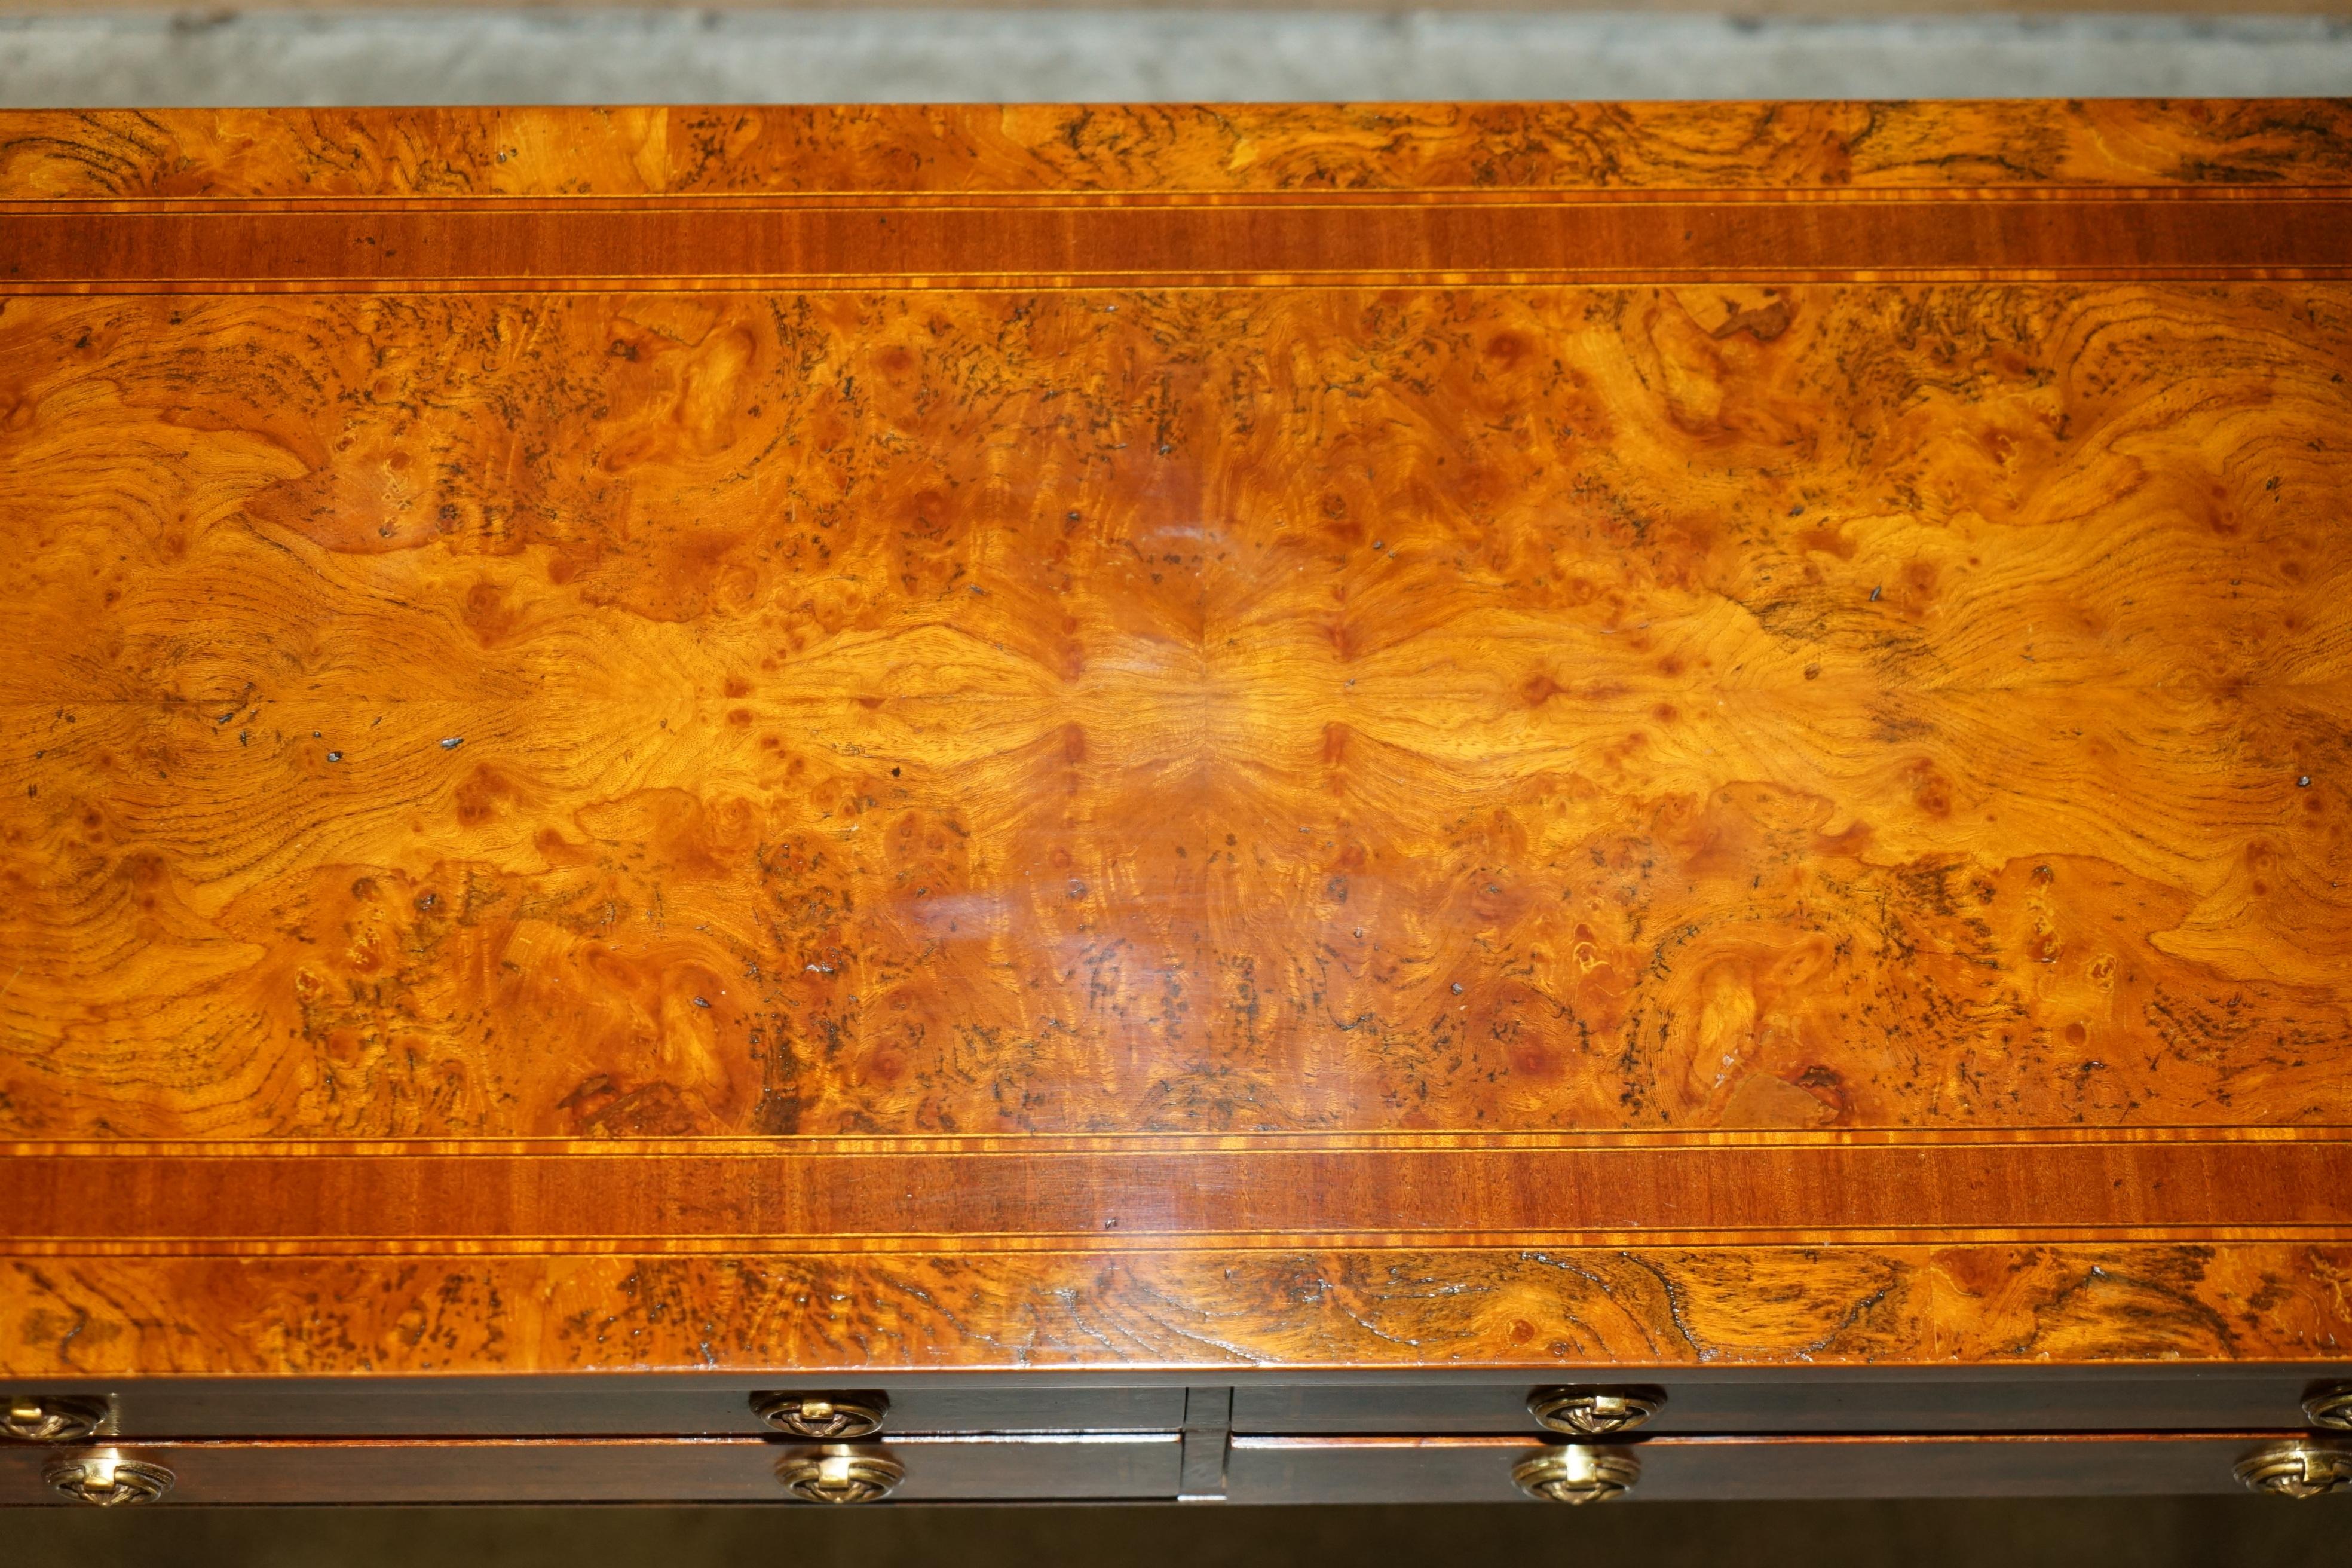 EXQUISITE CIRCA 1920 BURR ELM & SATiNWOOD FRENCH POLISHED RESTORED CONSOLE TABLE For Sale 4